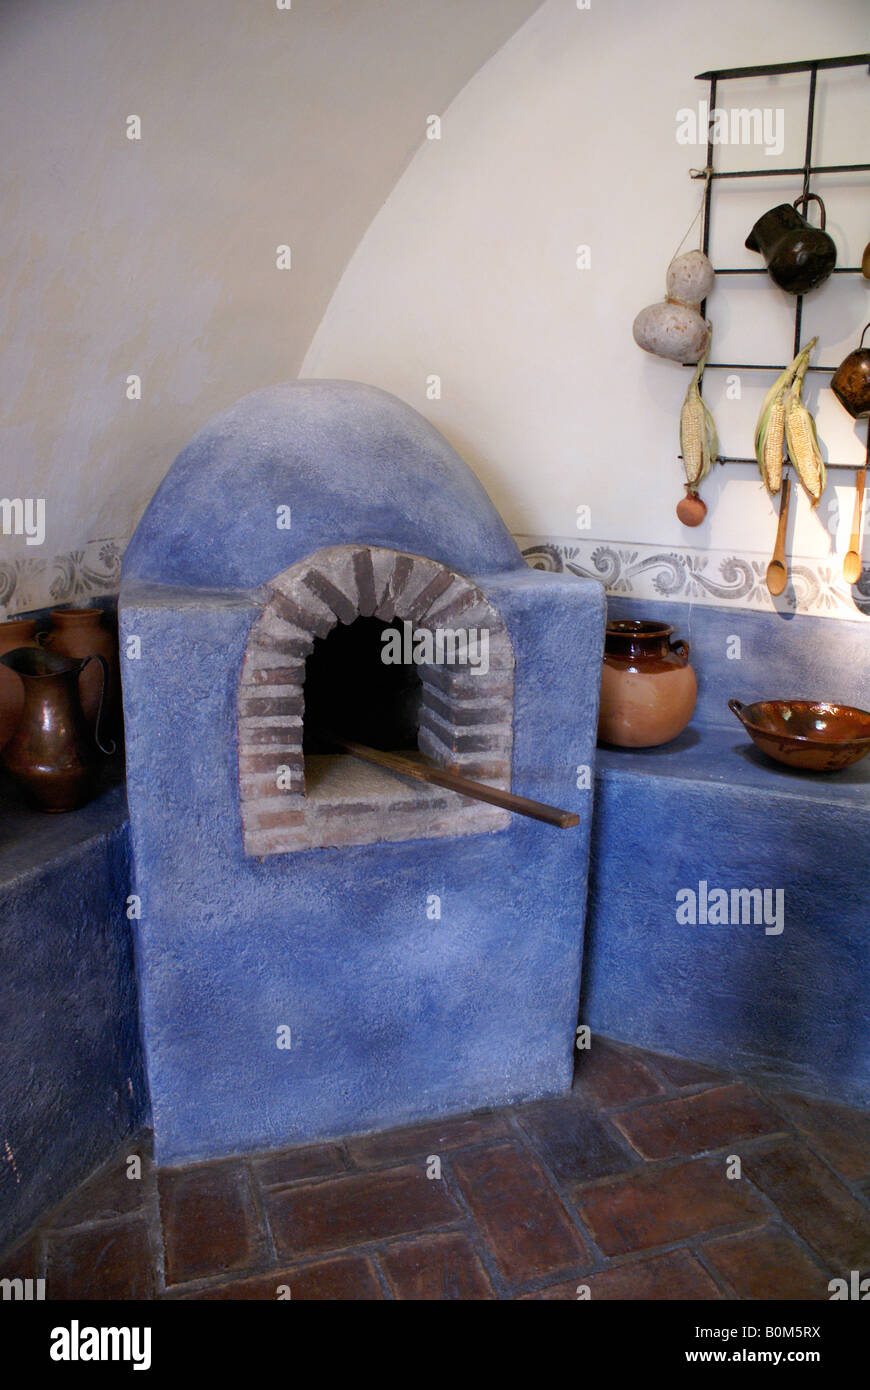 https://c8.alamy.com/comp/B0M5RX/the-18th-century-spanish-colonial-kitchen-in-fuerte-san-diego-fort-B0M5RX.jpg